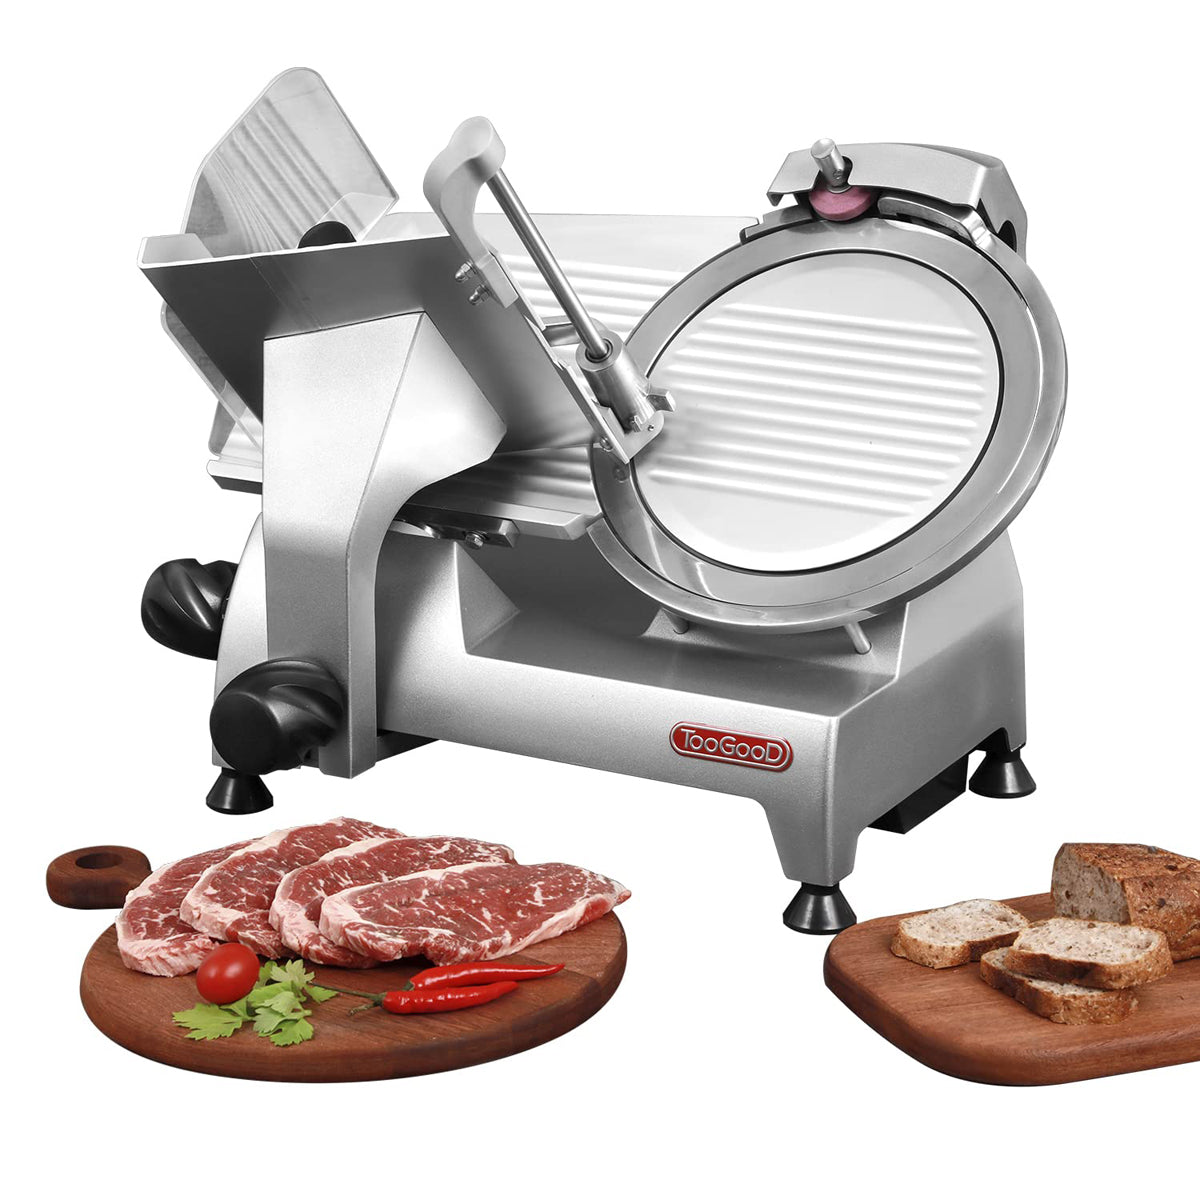 180W 1/4 HP Electric Meat Slicer, 8.7" Italian Carbon Steel Blade, for Meat Cheese Bread